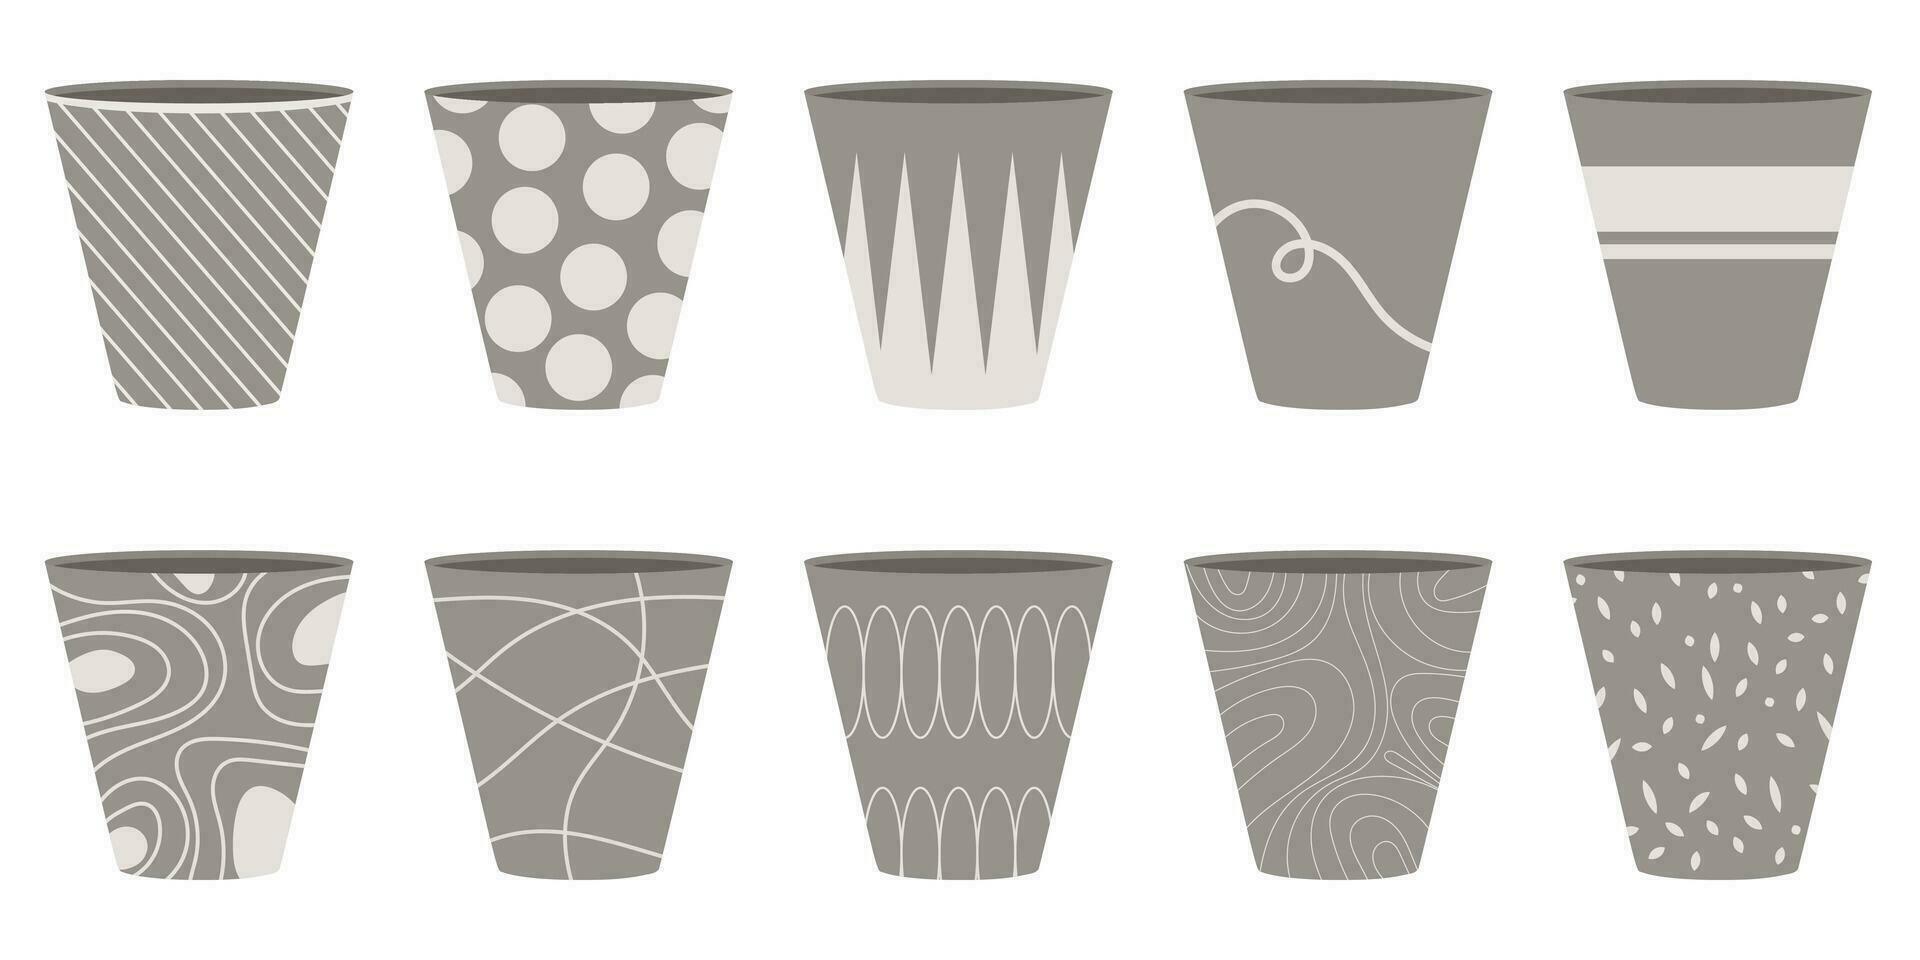 Ceramic flower pots. Set of vector illustrations isolated on white background.